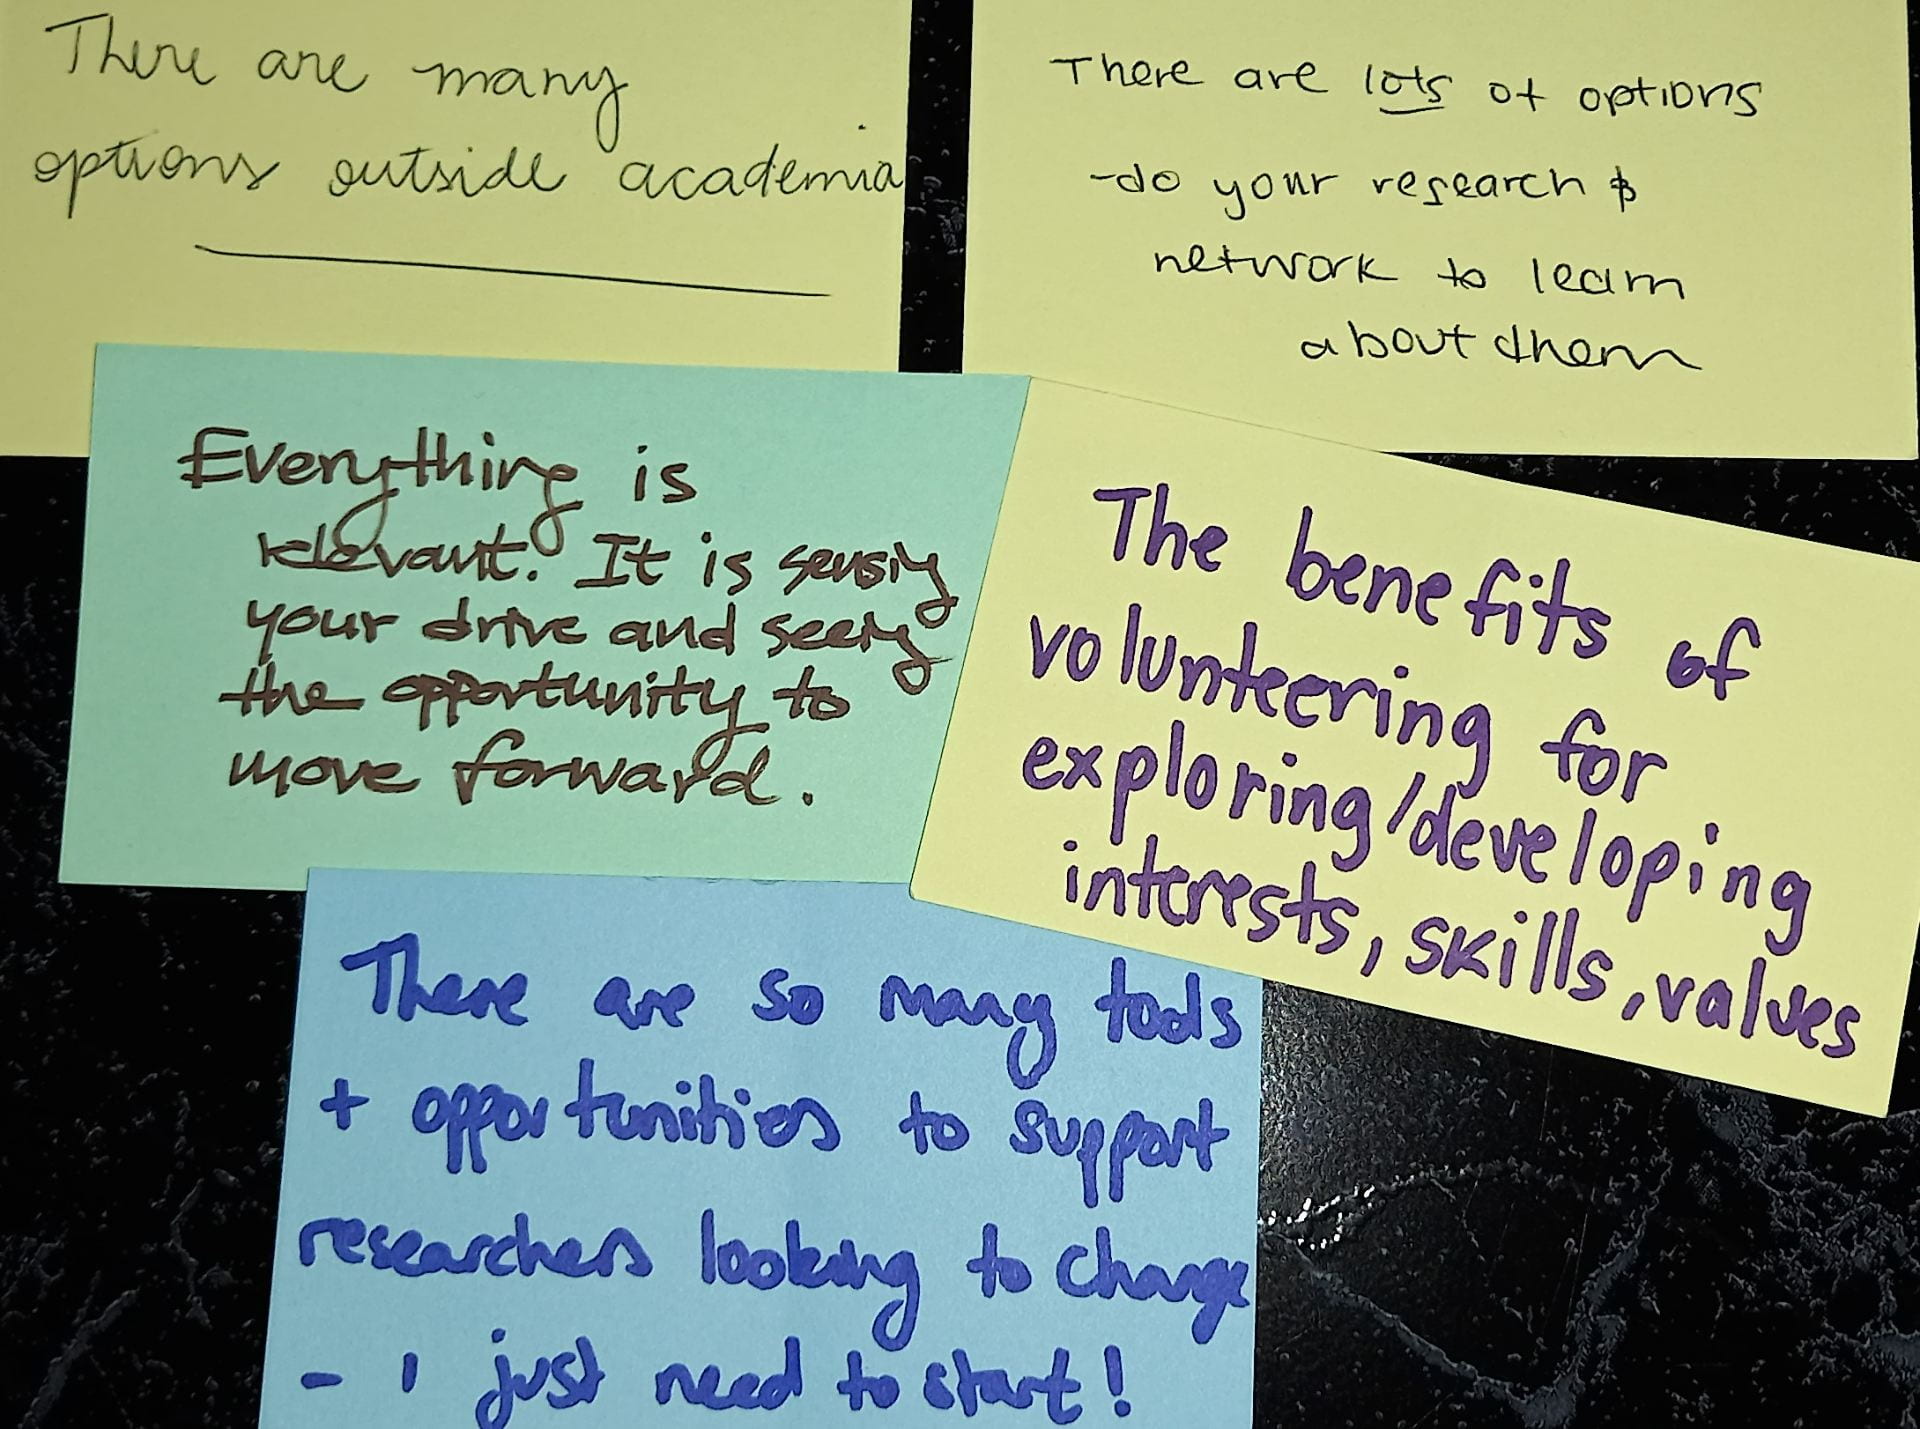 Take-home messages from the Careers Beyond Research event: There are many options outside academia, there are lots of options - do your research and network to learn about them, everything is relevant. It is sensing your drive and seeing the opportunity to move forward, the benefits of volunteering for exploring/developing interests, skills, values, there are so many tools + opportunities to support researchers looking to change - I just need to start!